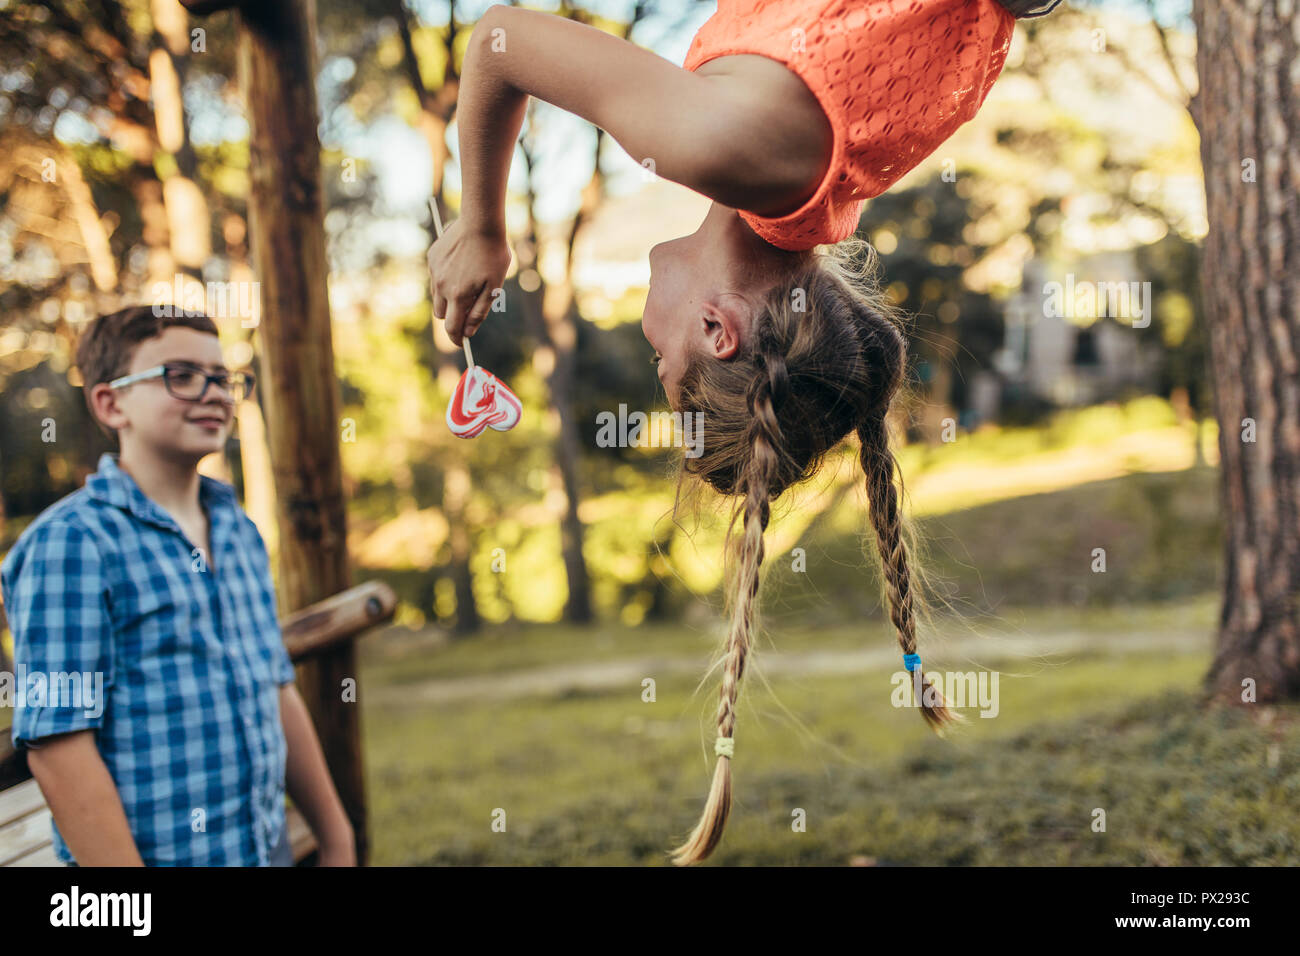 Girl hanging upside down in a park holding a heart shaped candy lollipop. Smiling boy standing in a park while looking at his girlfriend who is hangin Stock Photo